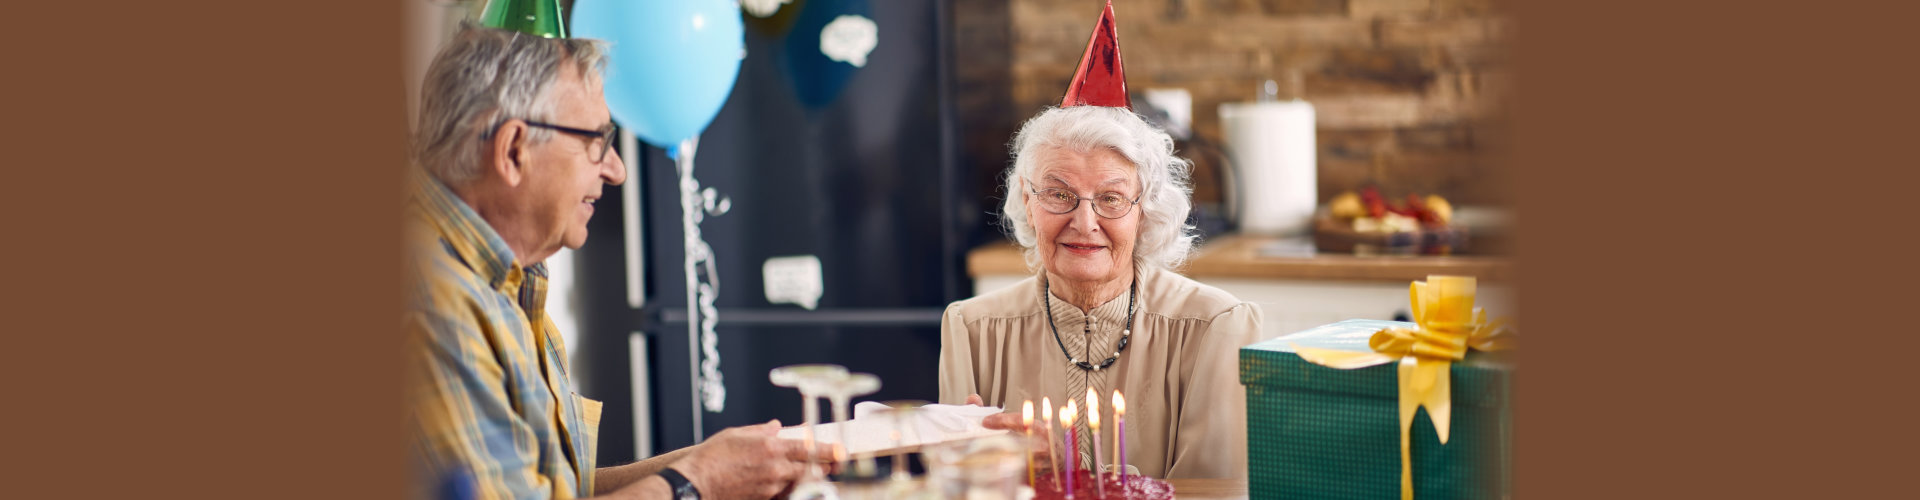 Beautiful happy senior couple sitting at kitchen table in birthday hats, elderly man giving a birthday present to her wife. Lifestyle, senior life, togetherness concept.